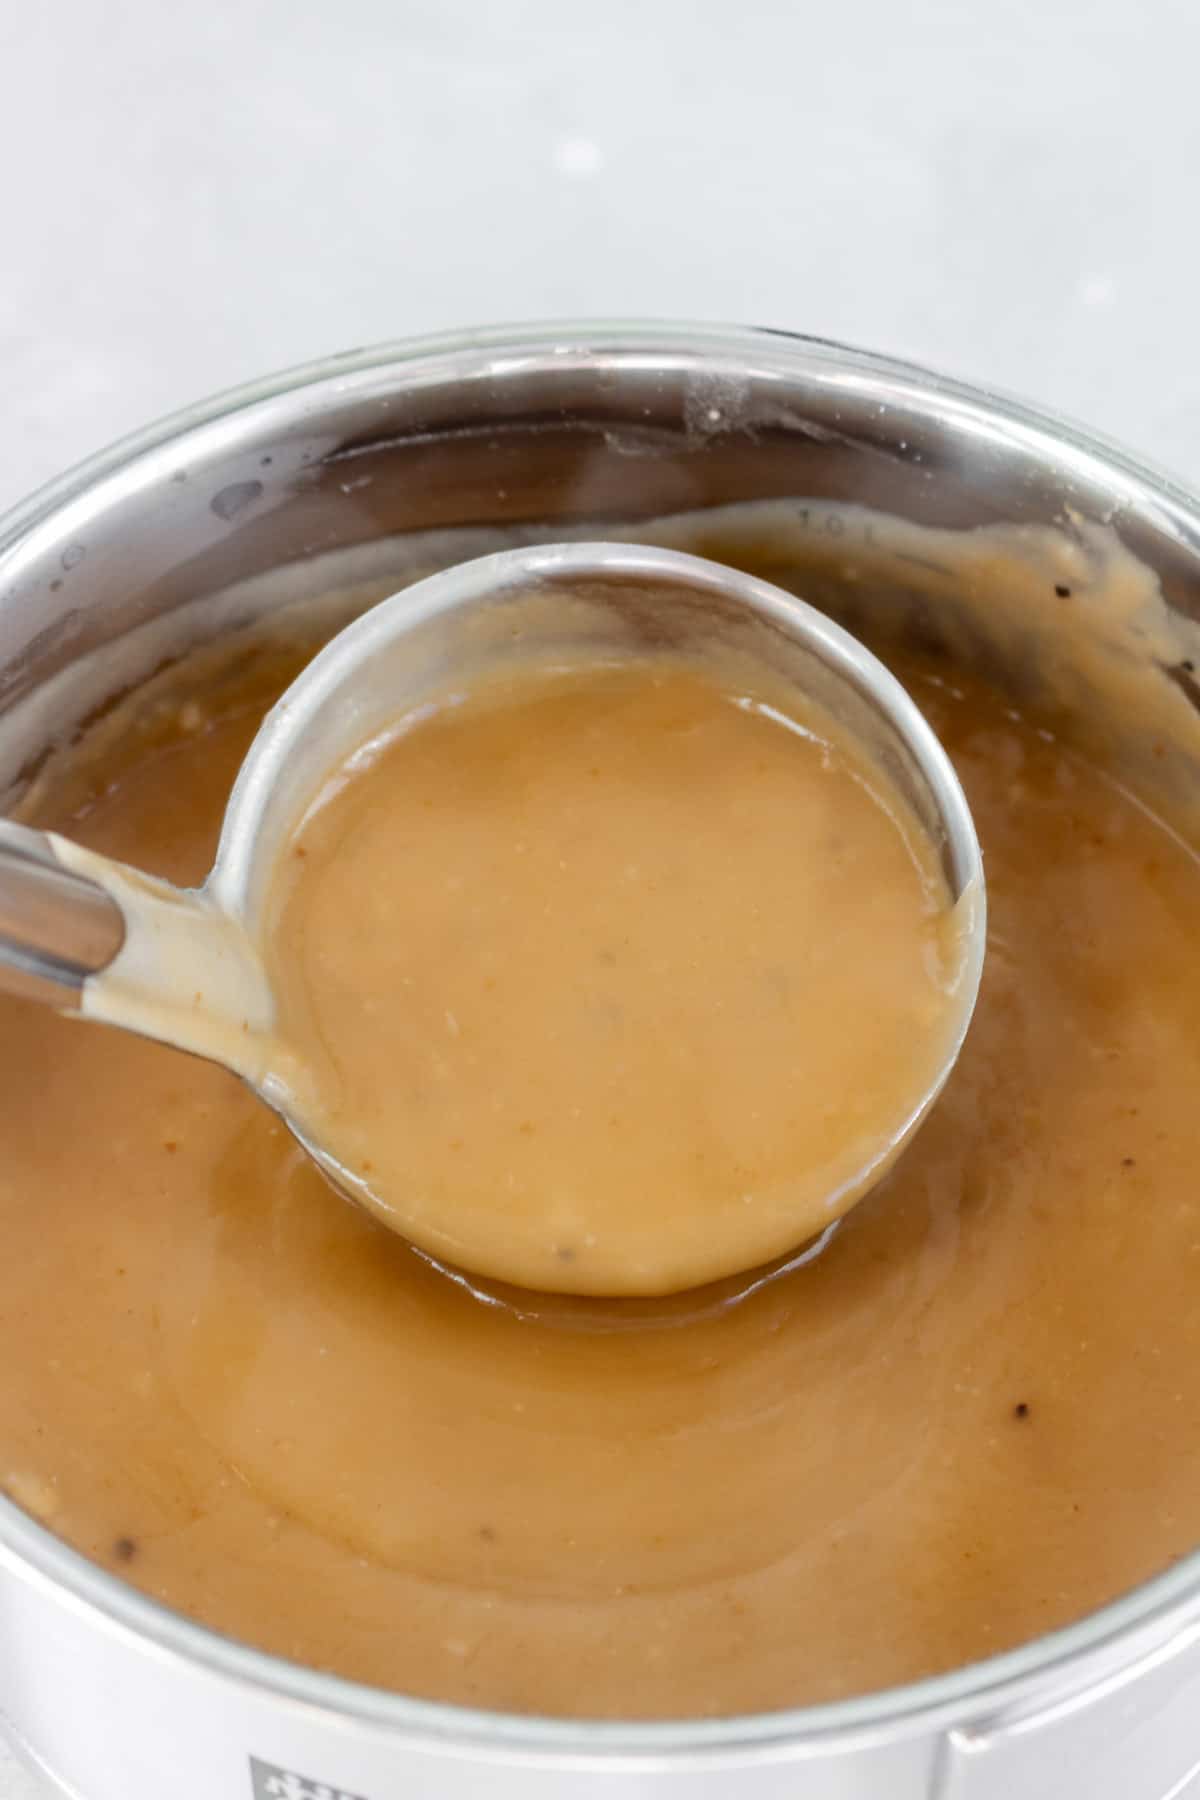 A pot of gravy being scooped.